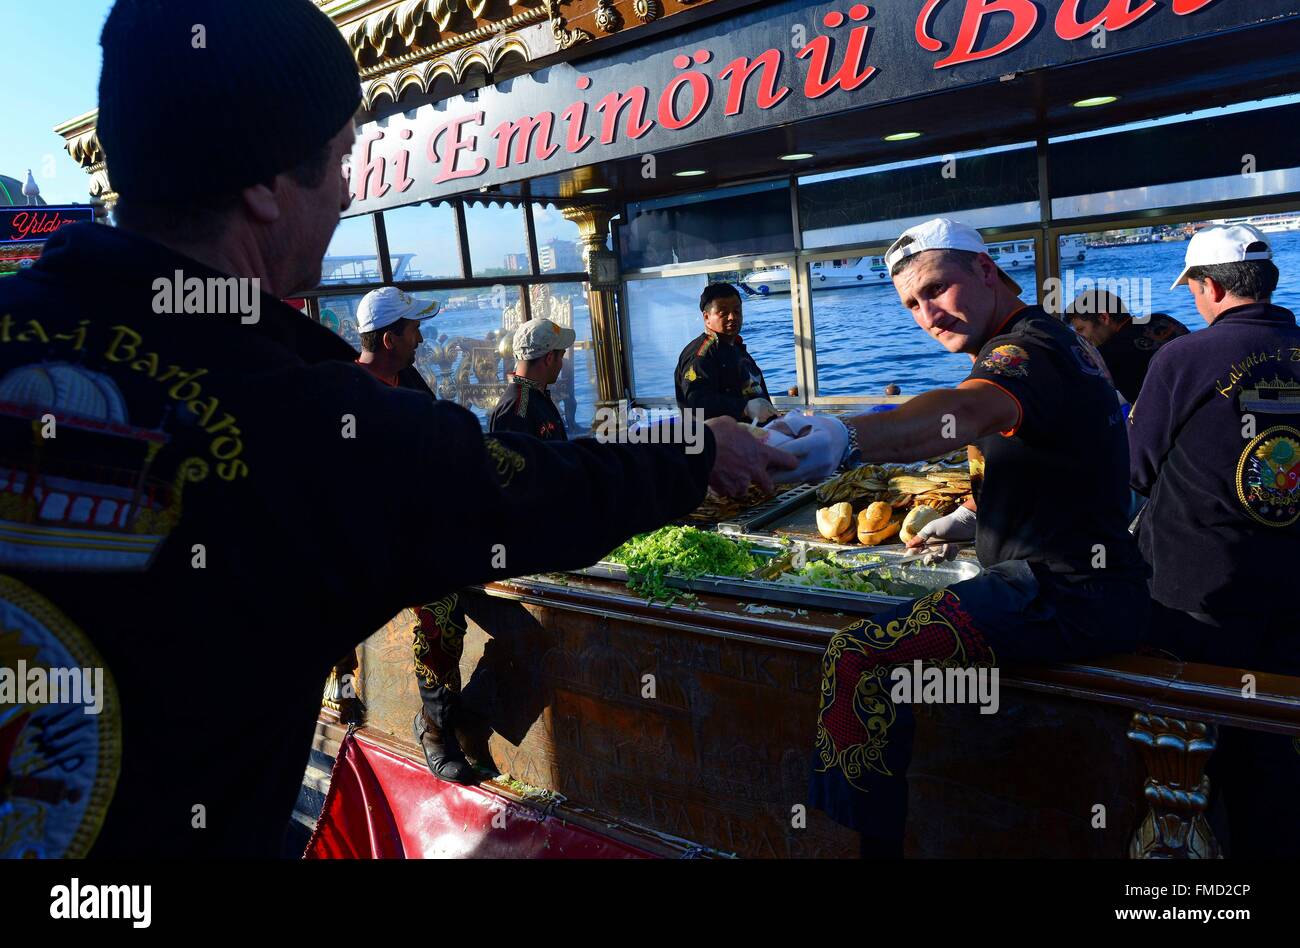 Turkey, Istanbul, Boat of sale of grilled fish sandwiches out on waters of the Golden horn Stock Photo